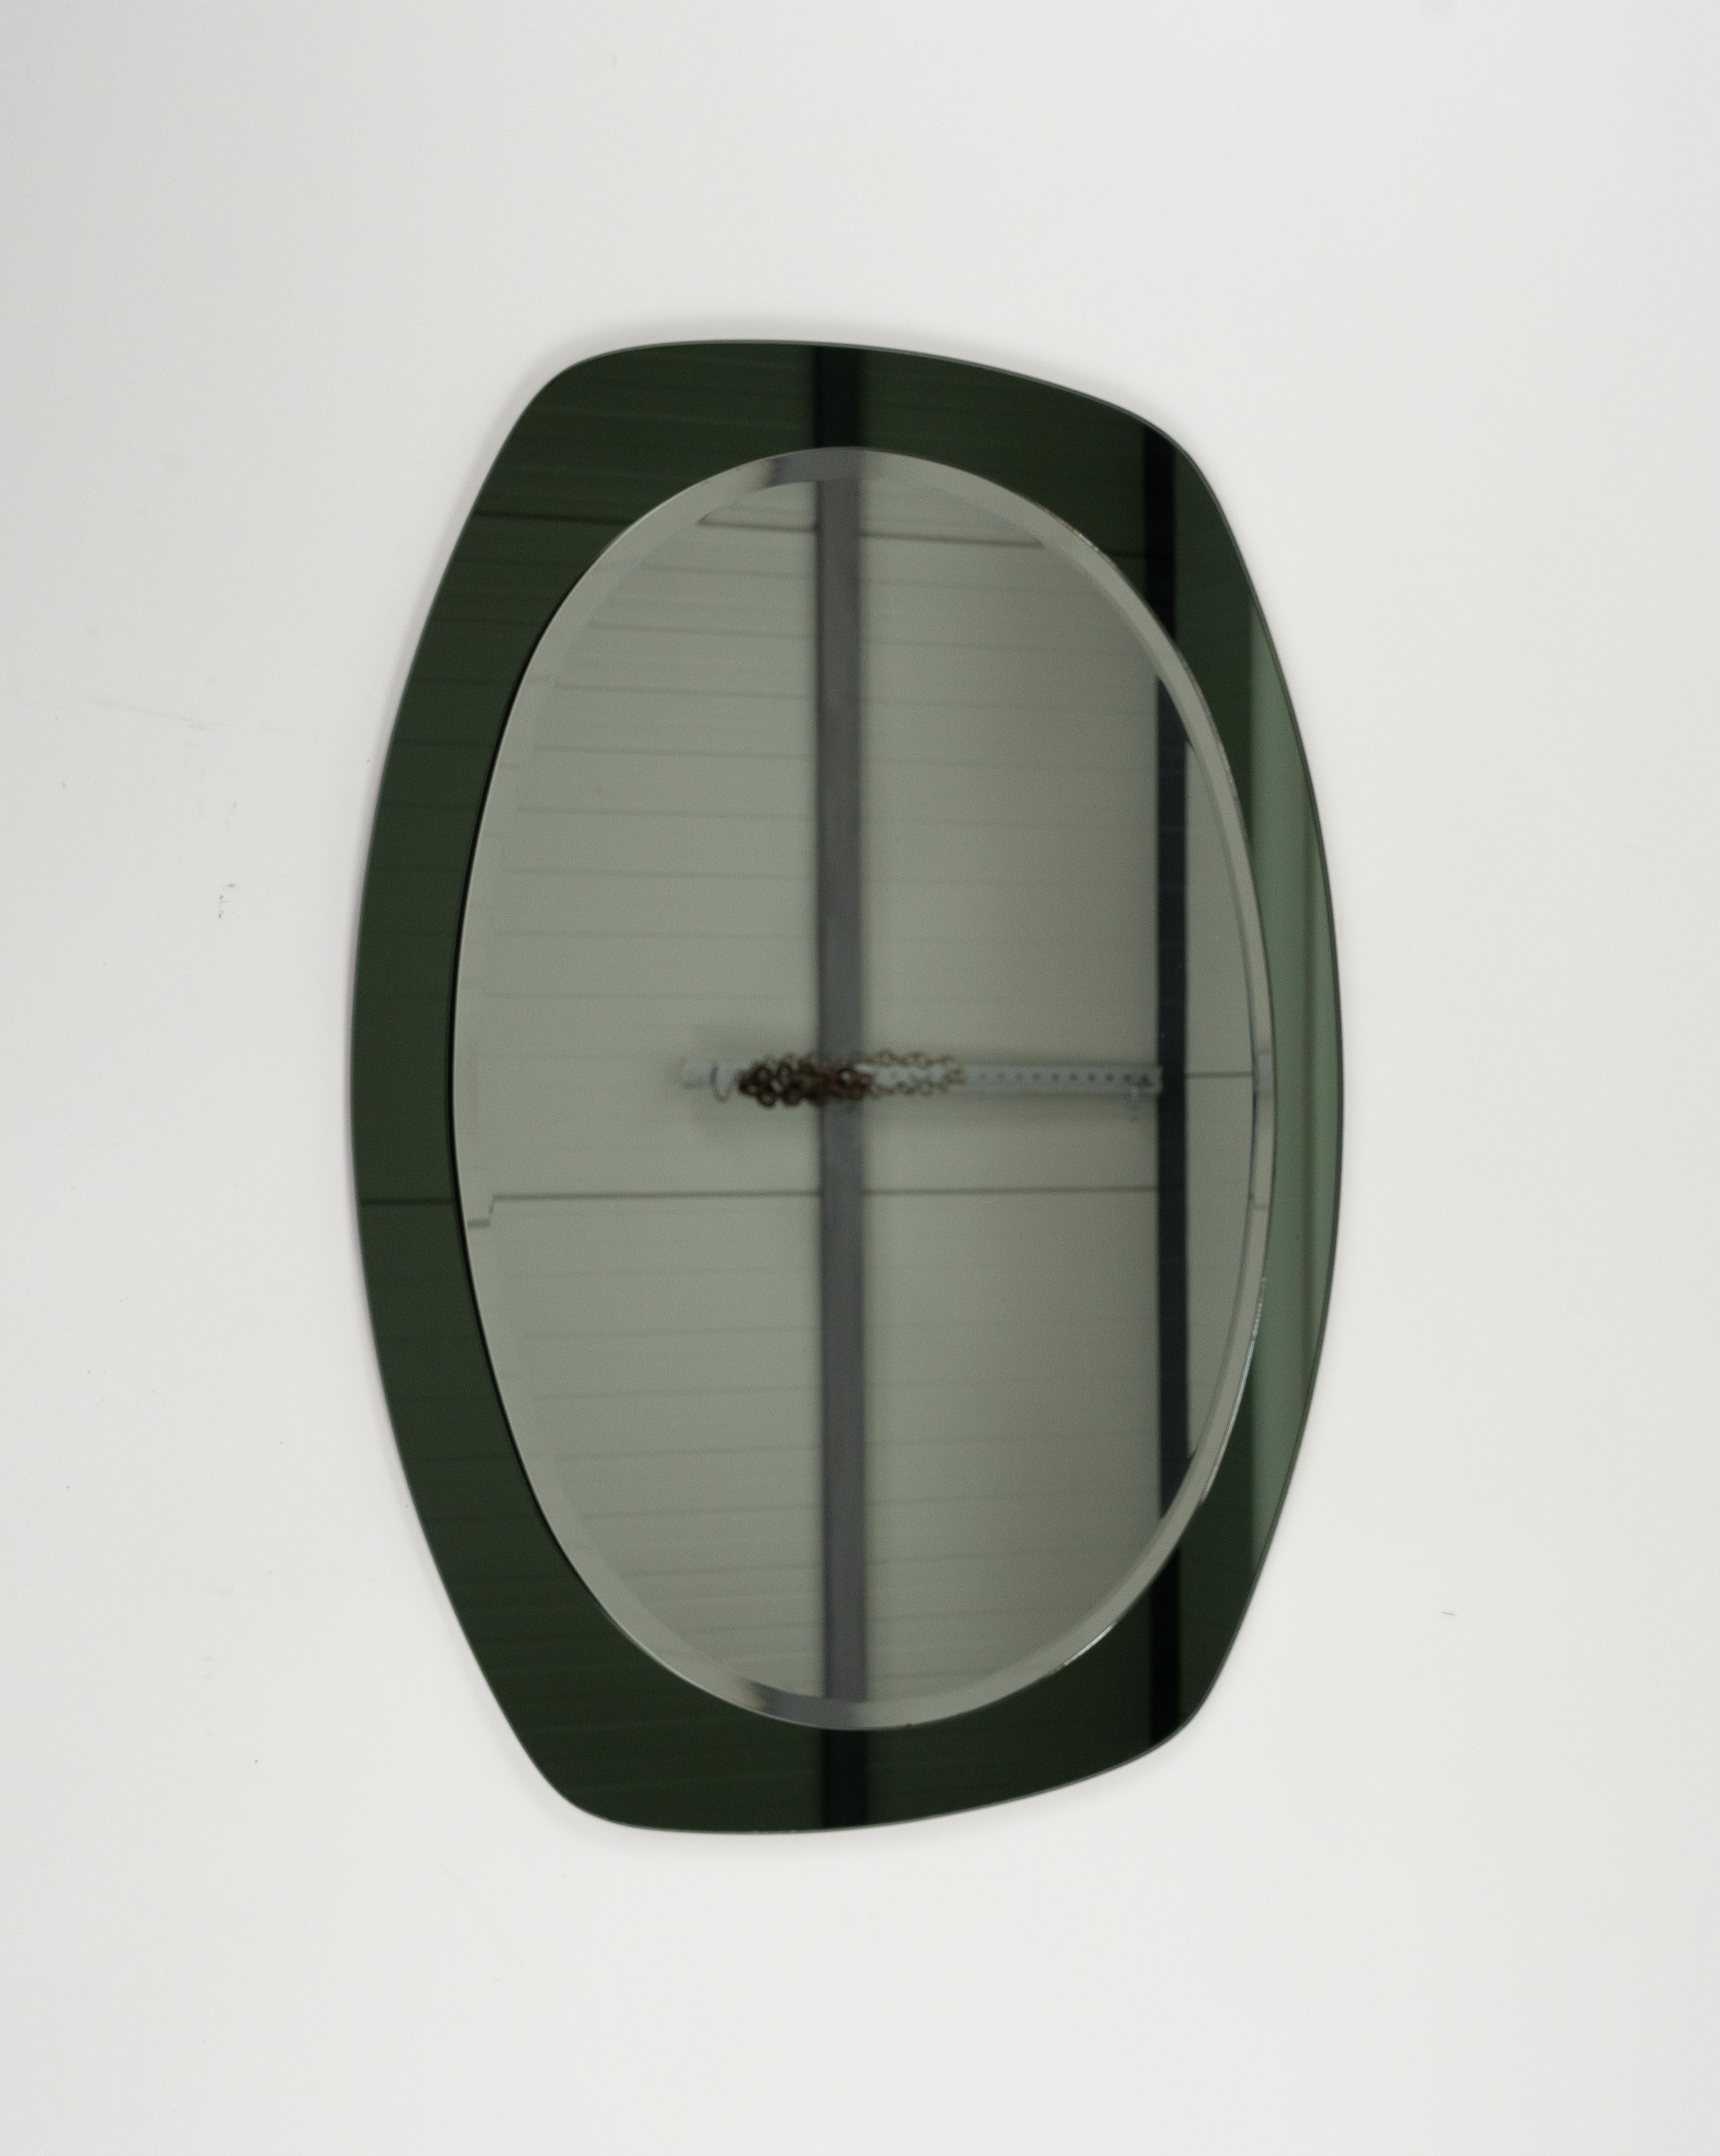 Midcentury Cristal Art Oval Wall Mirror with Green Frame, Italy 1960s For Sale 4